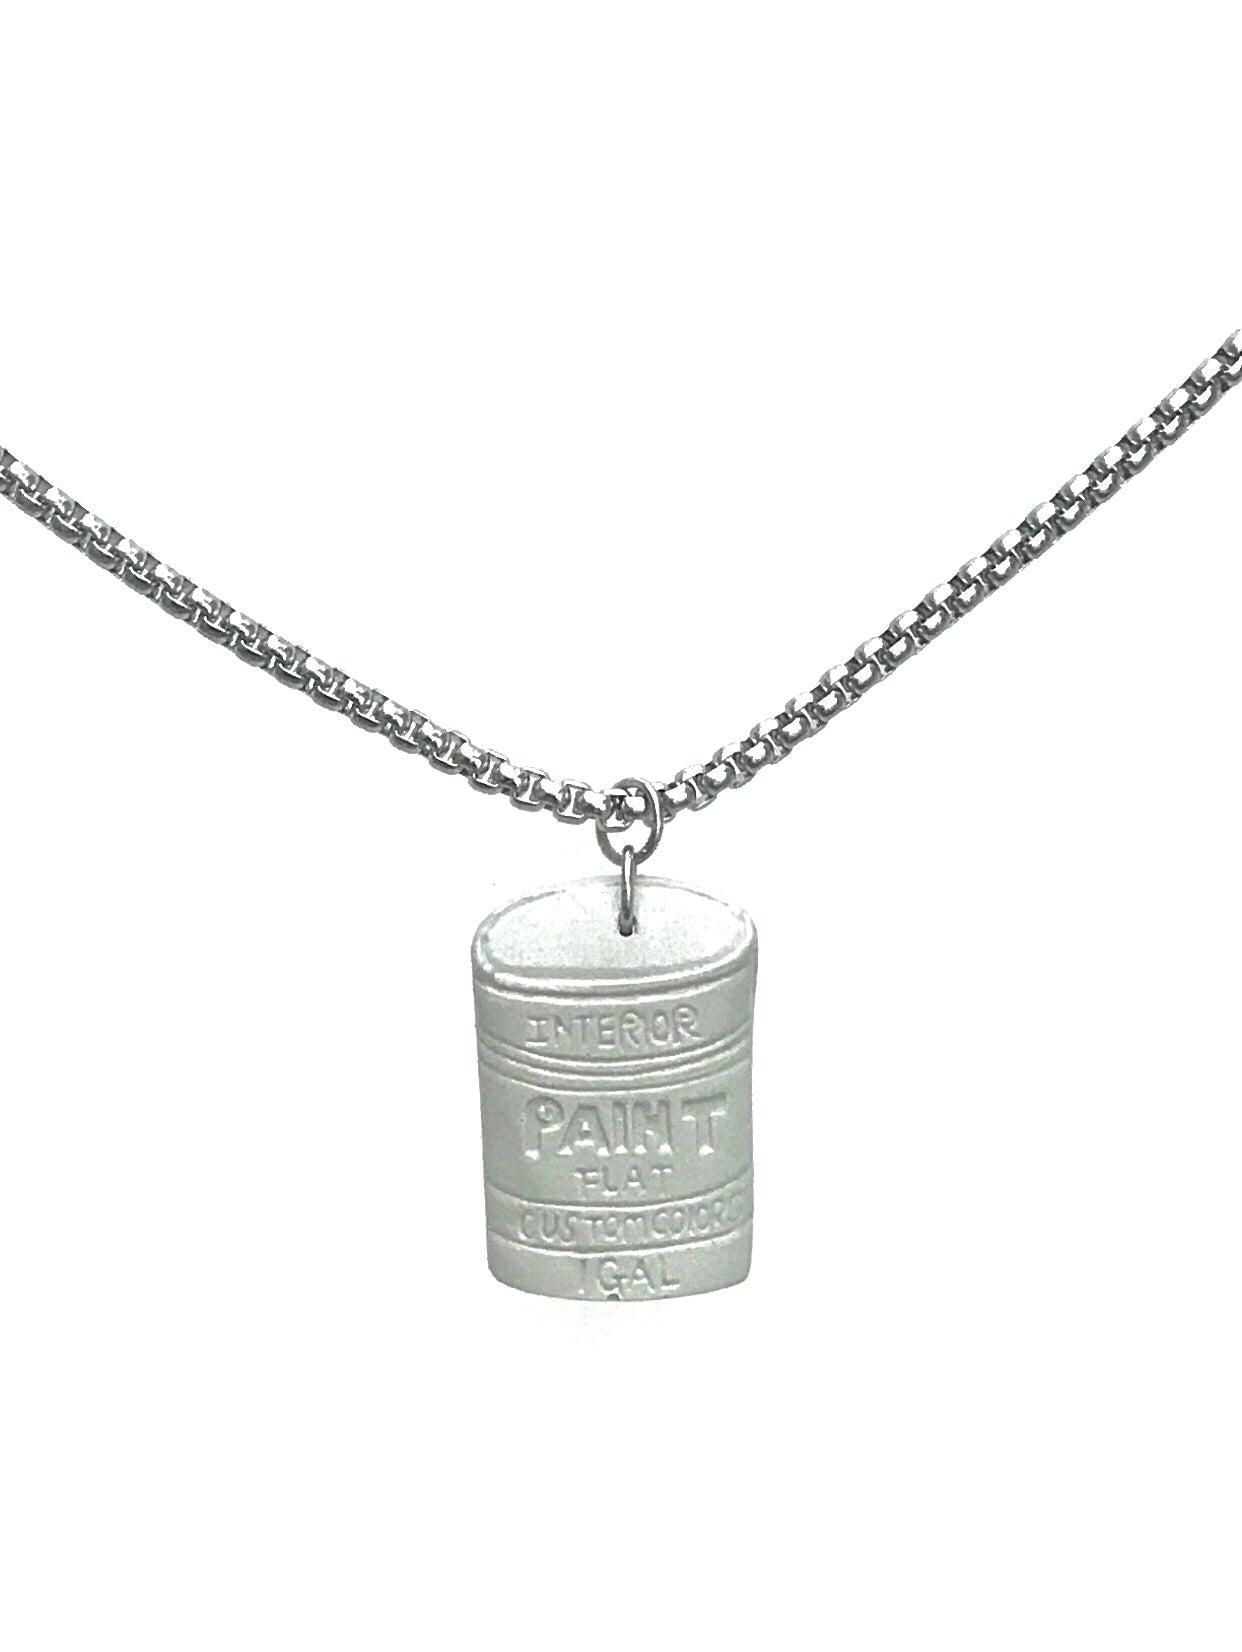 Paint can necklace